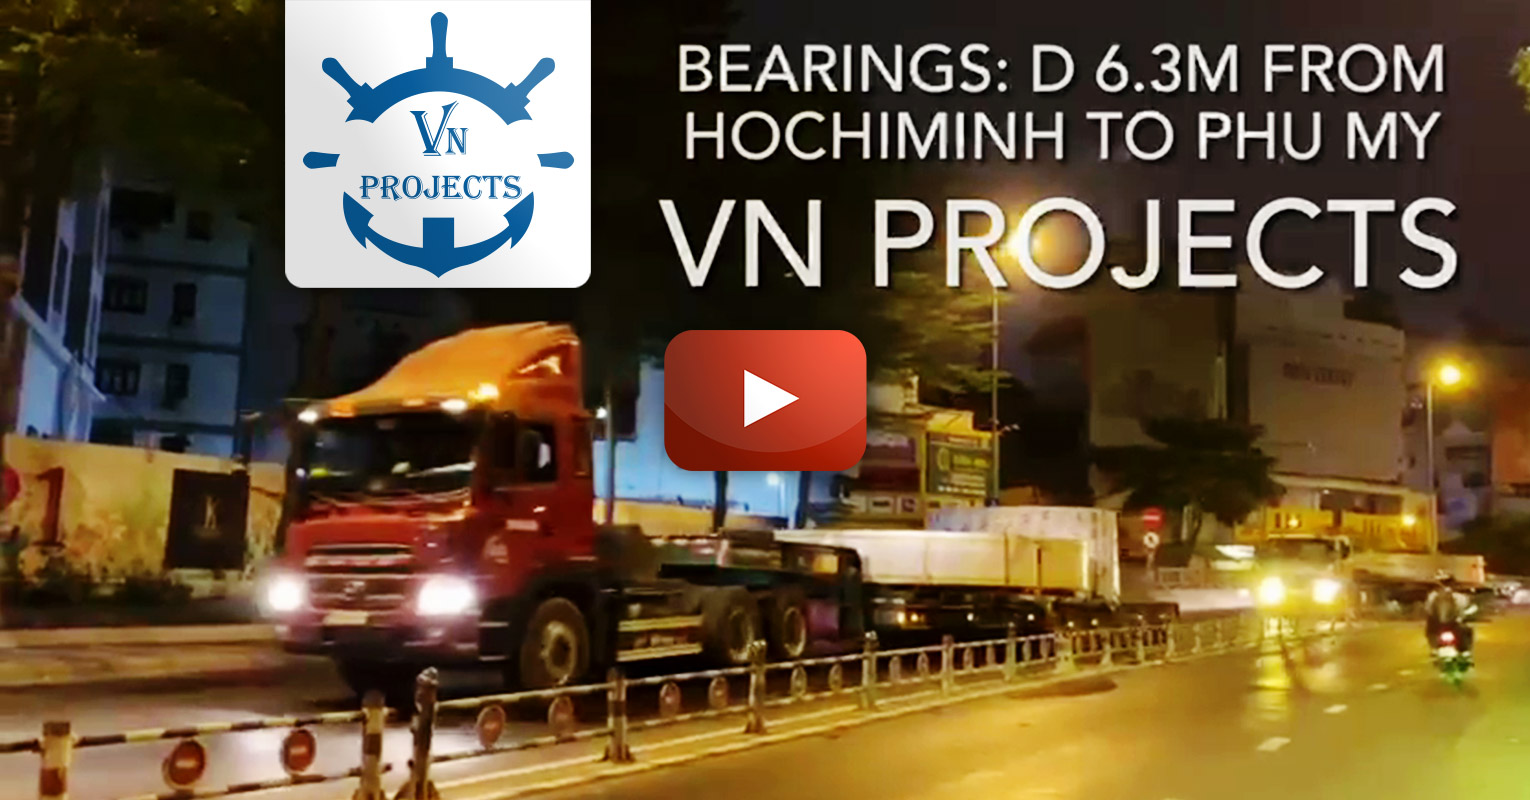 VN Projects is currently handling 60 units of flange bearings (diameter 6.3m) for offshore windpower projects in Vietnam